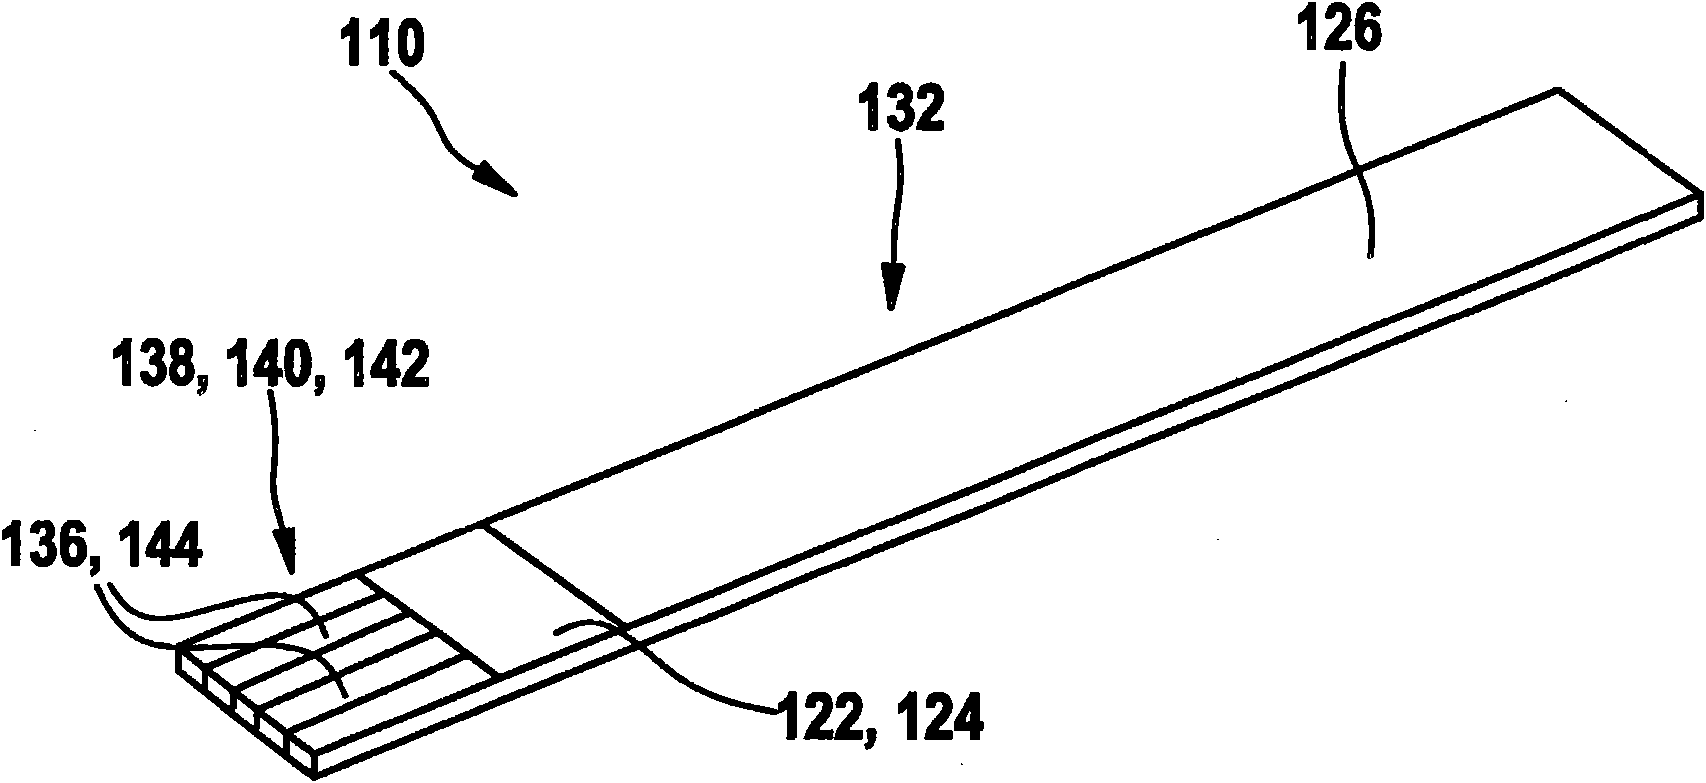 Method for peripheral contacting in ceramic components